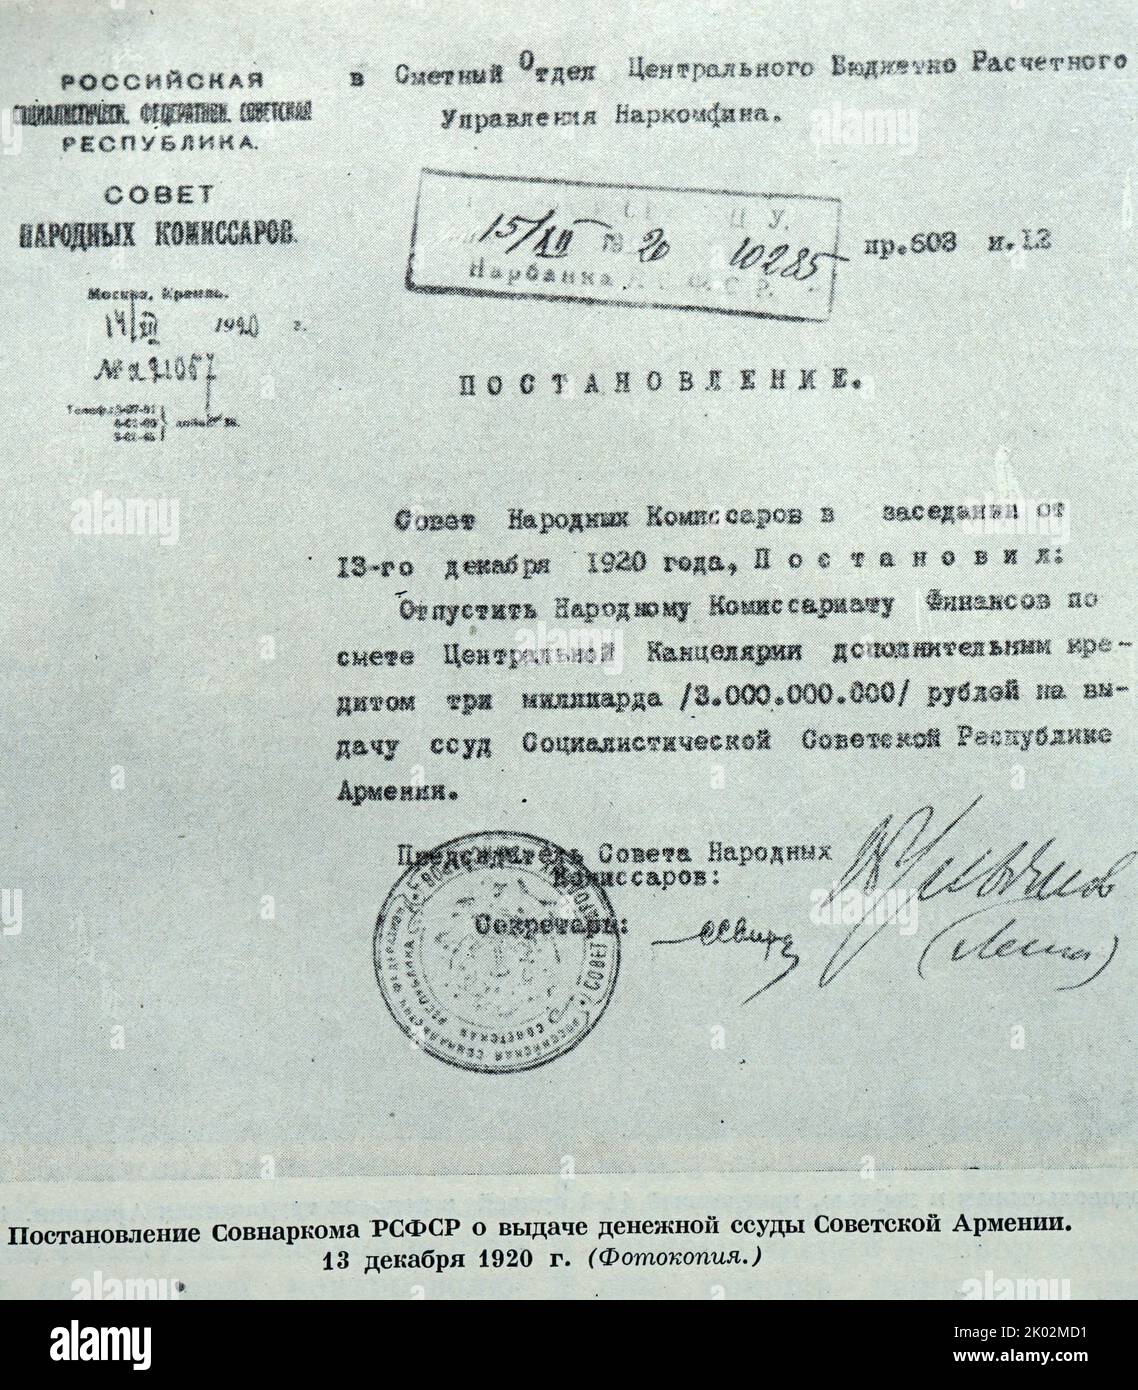 Decree of the Council of Peoples Commissars of the RSFSR on the issue of a monetary loan to Soviet Armenia. December 13, 1920. (Photocopy). Stock Photo